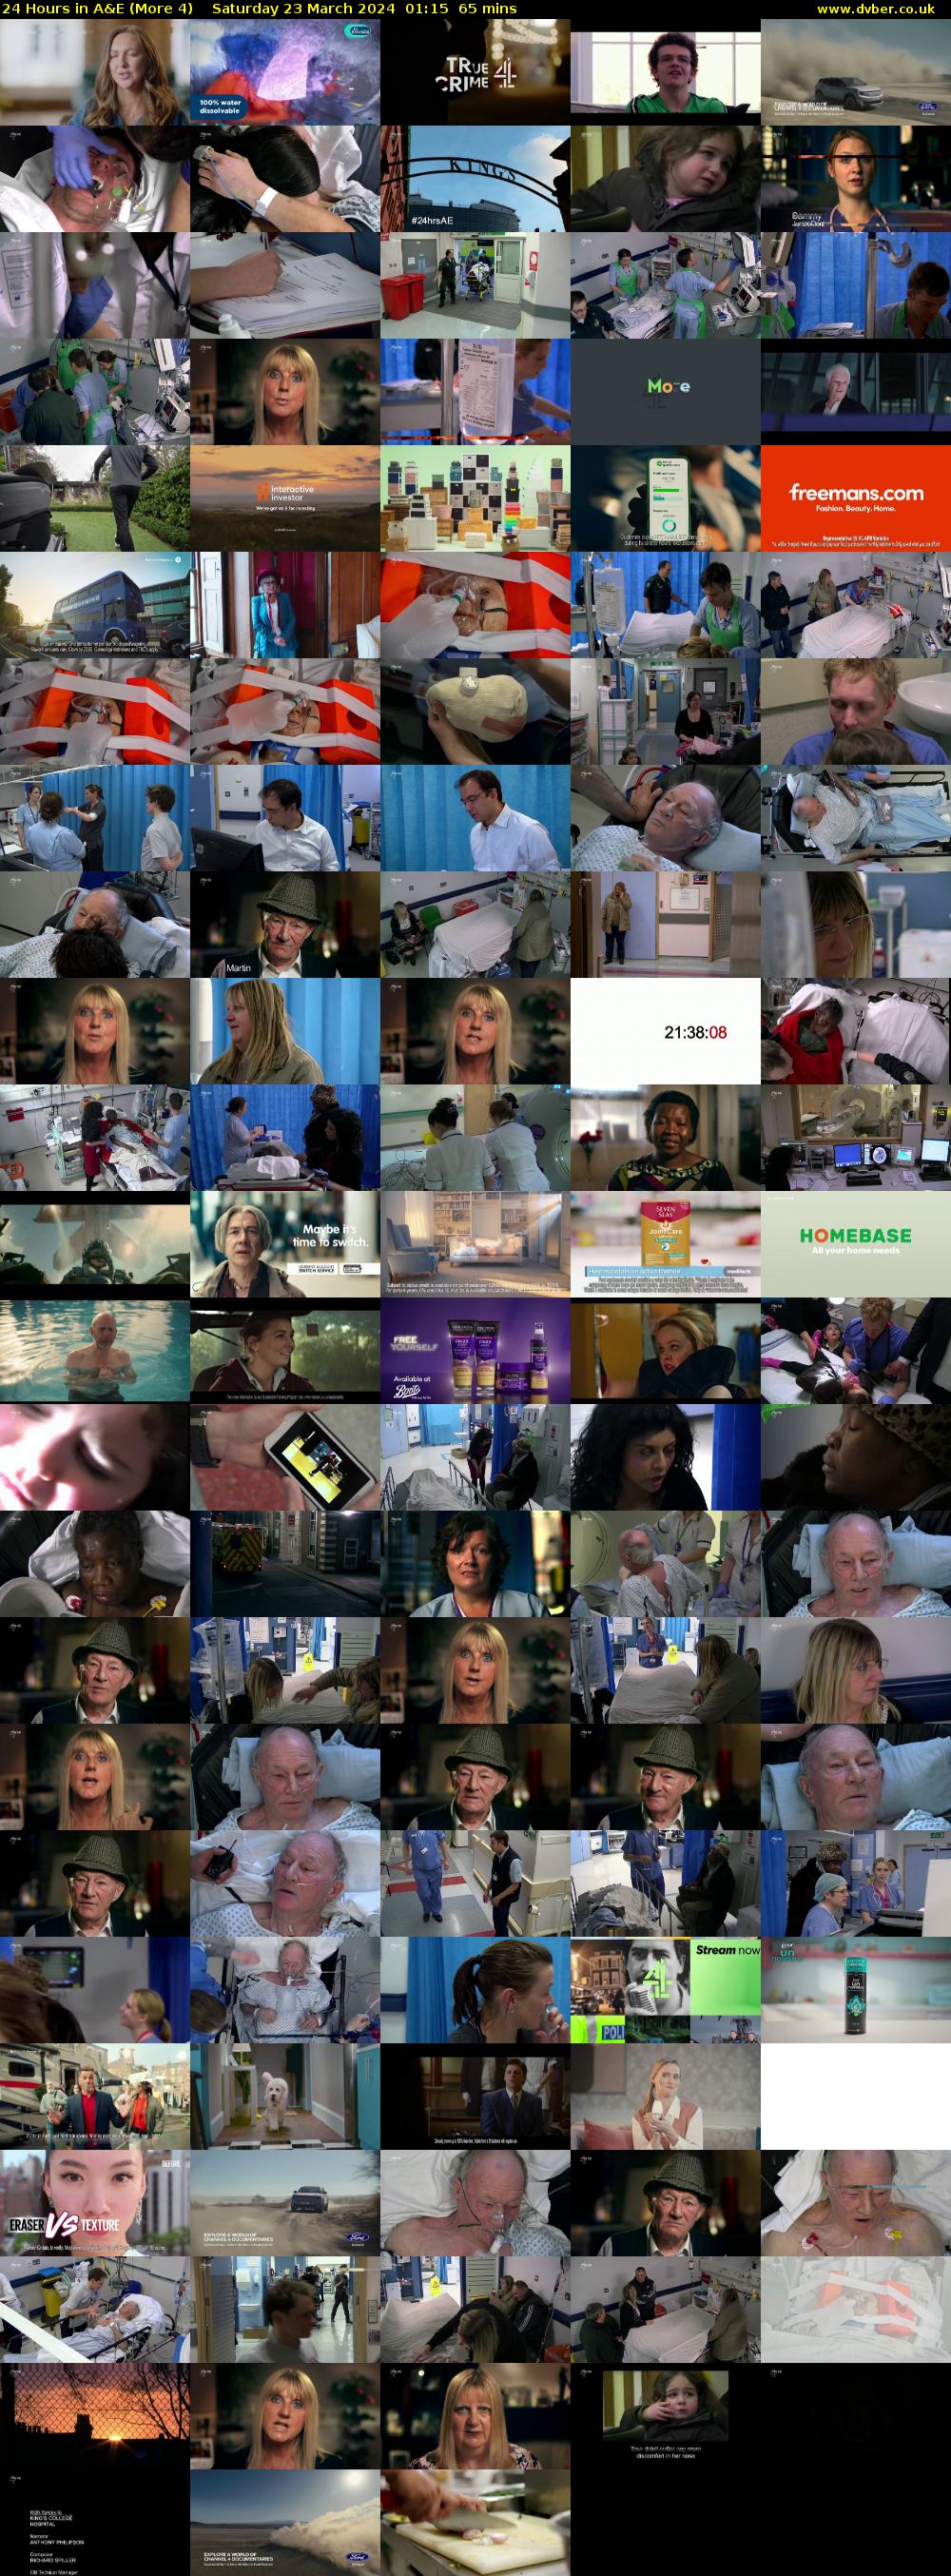 24 Hours in A&E (More 4) Saturday 23 March 2024 01:15 - 02:20